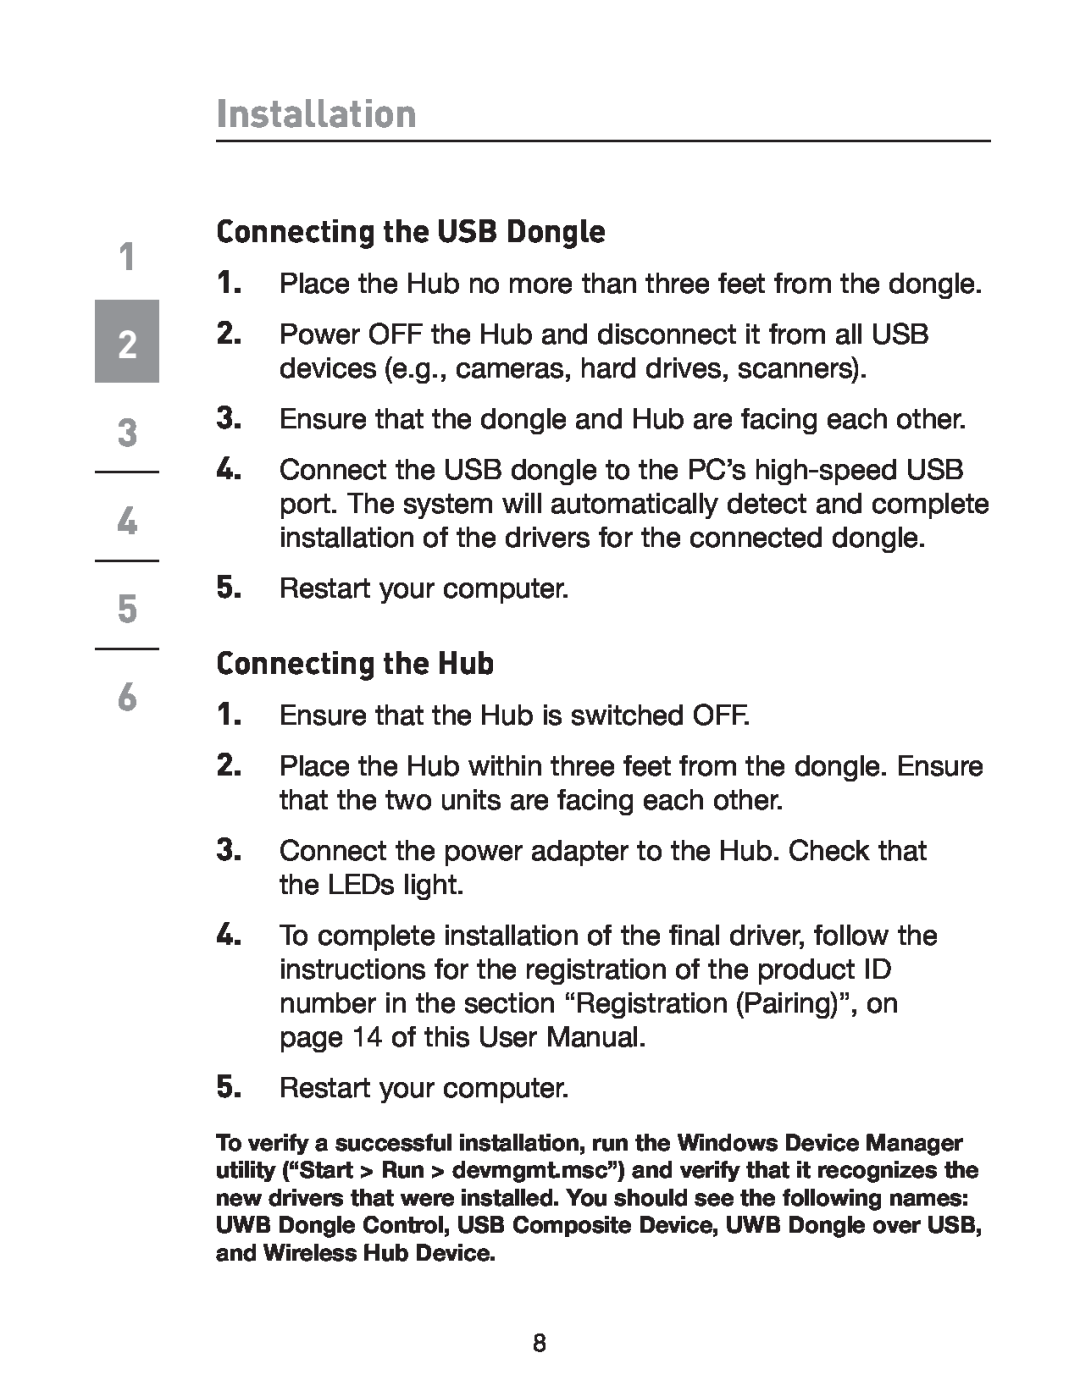 Belkin F5U301 user manual Installation, Connecting the USB Dongle, Connecting the Hub 